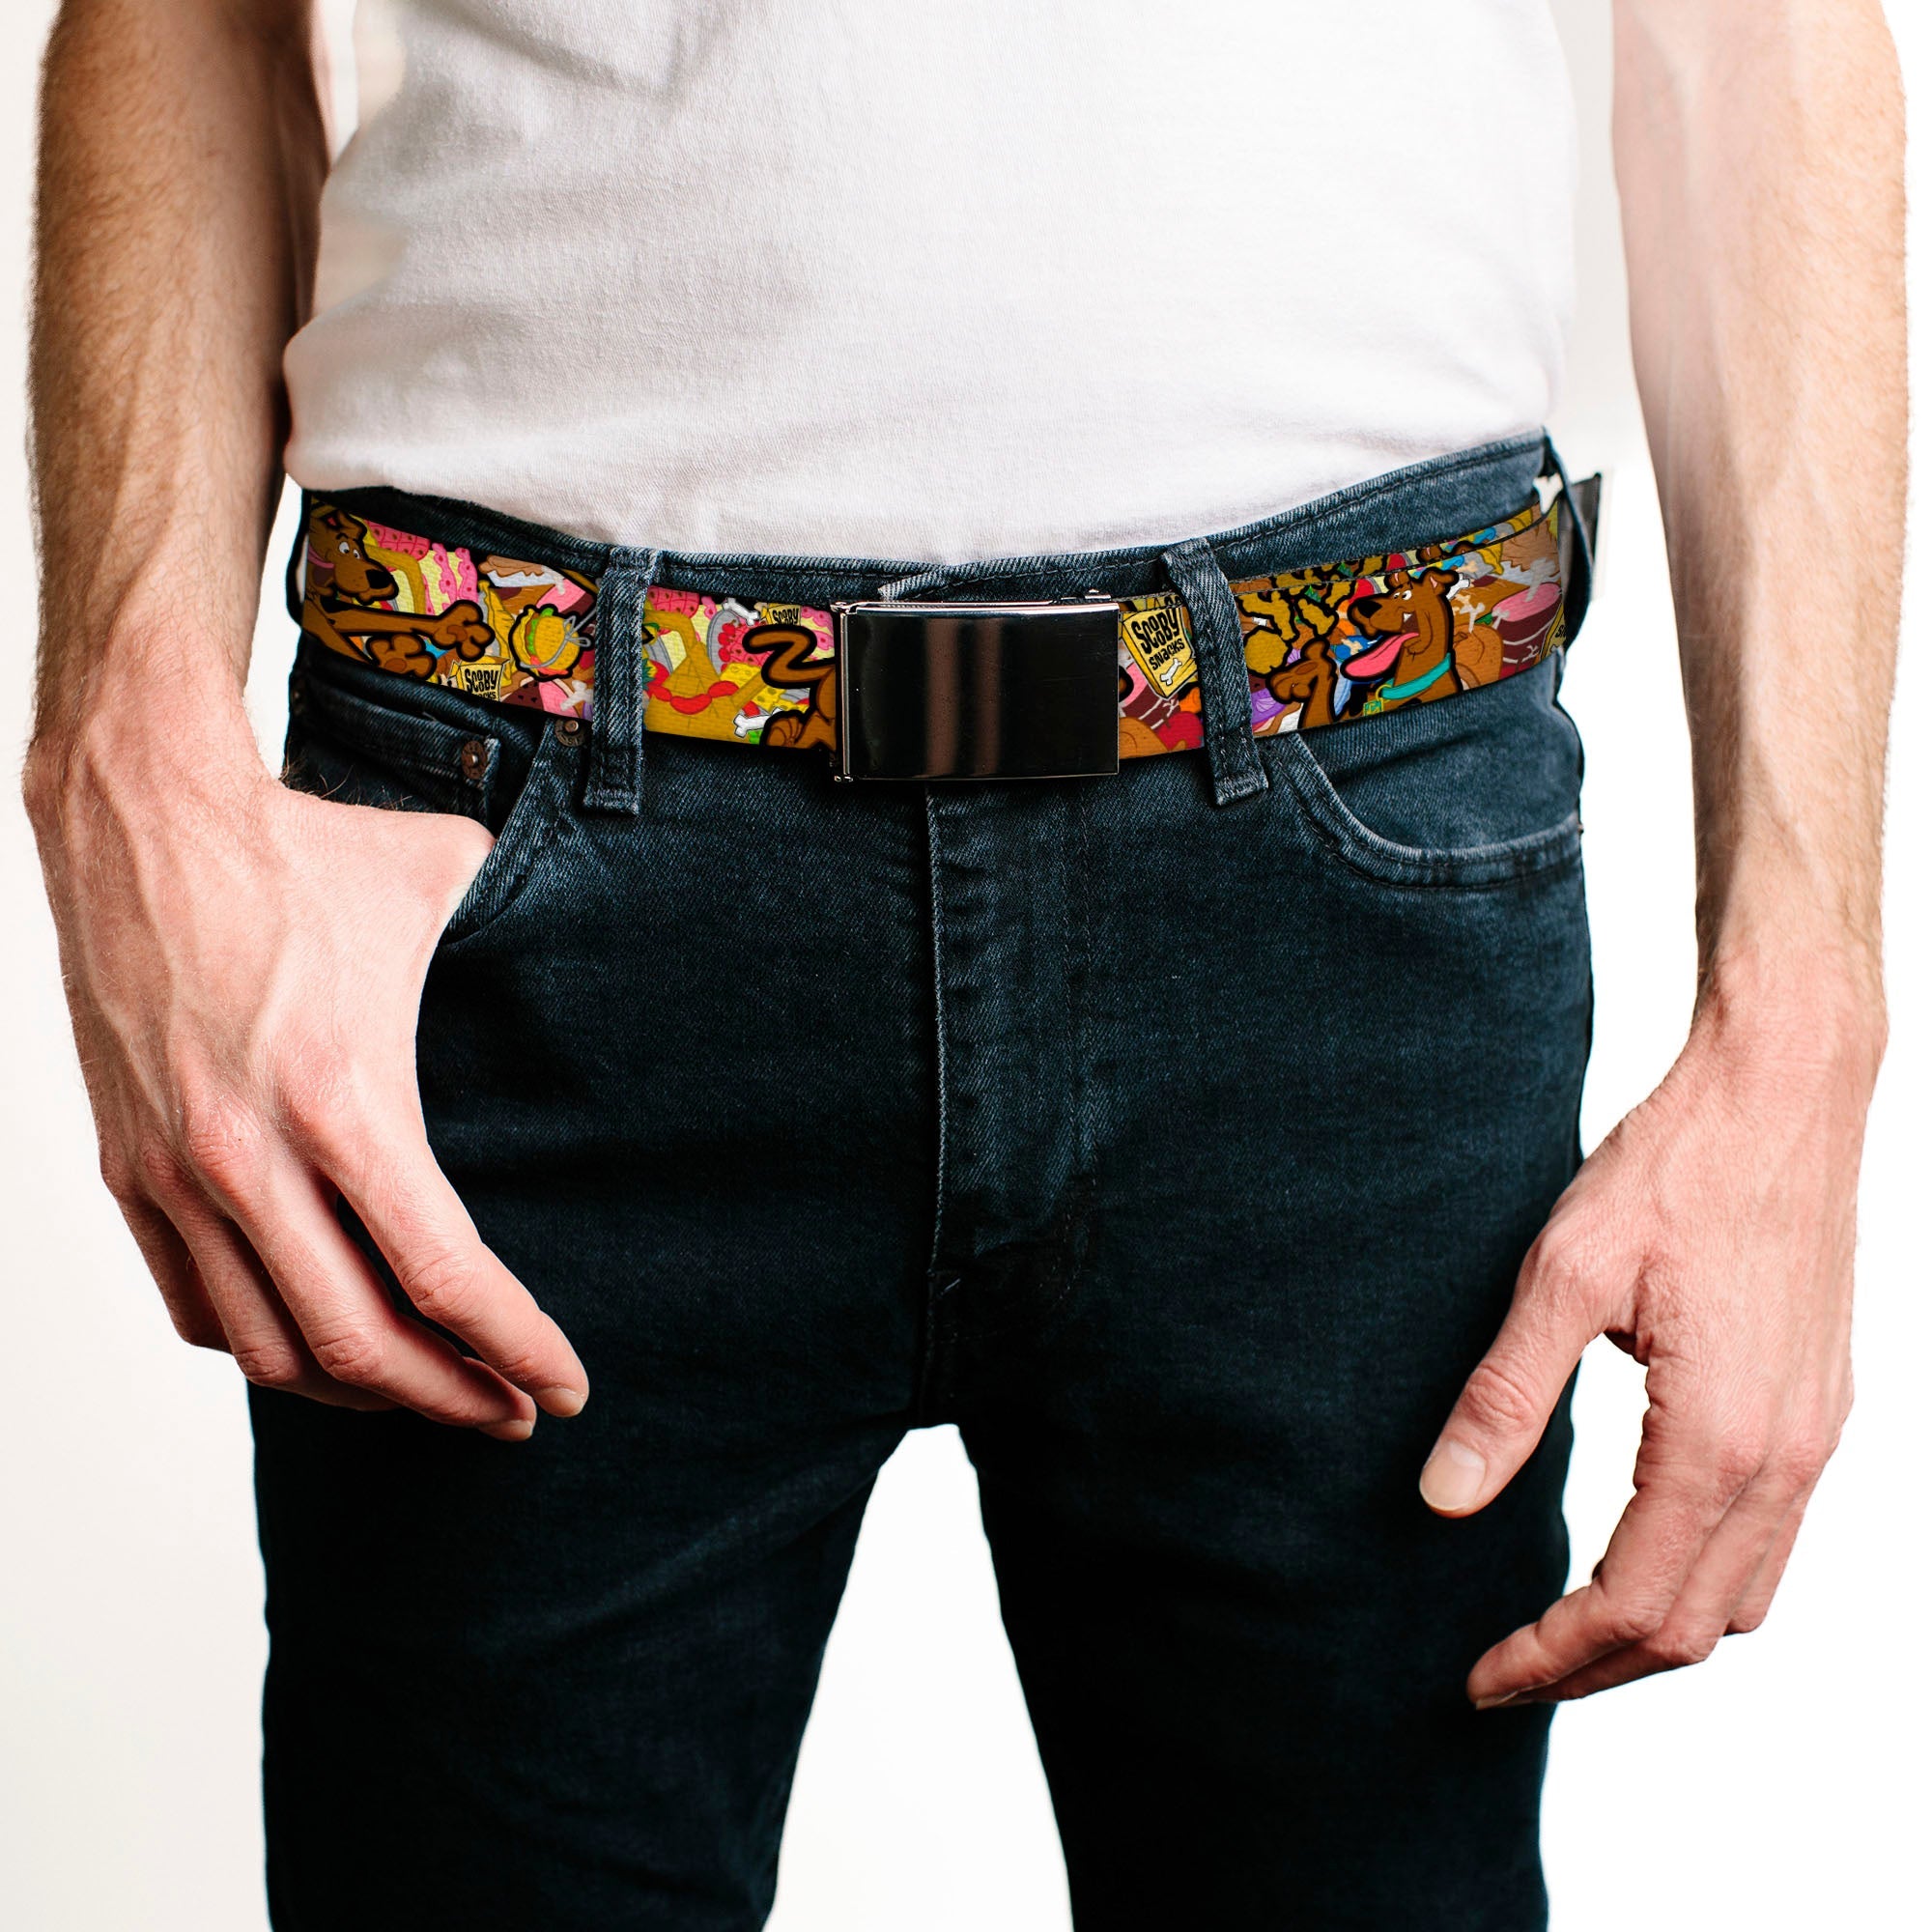 Chrome Buckle Web Belt - Scooby Doo Poses/Snacks Stacked Webbing